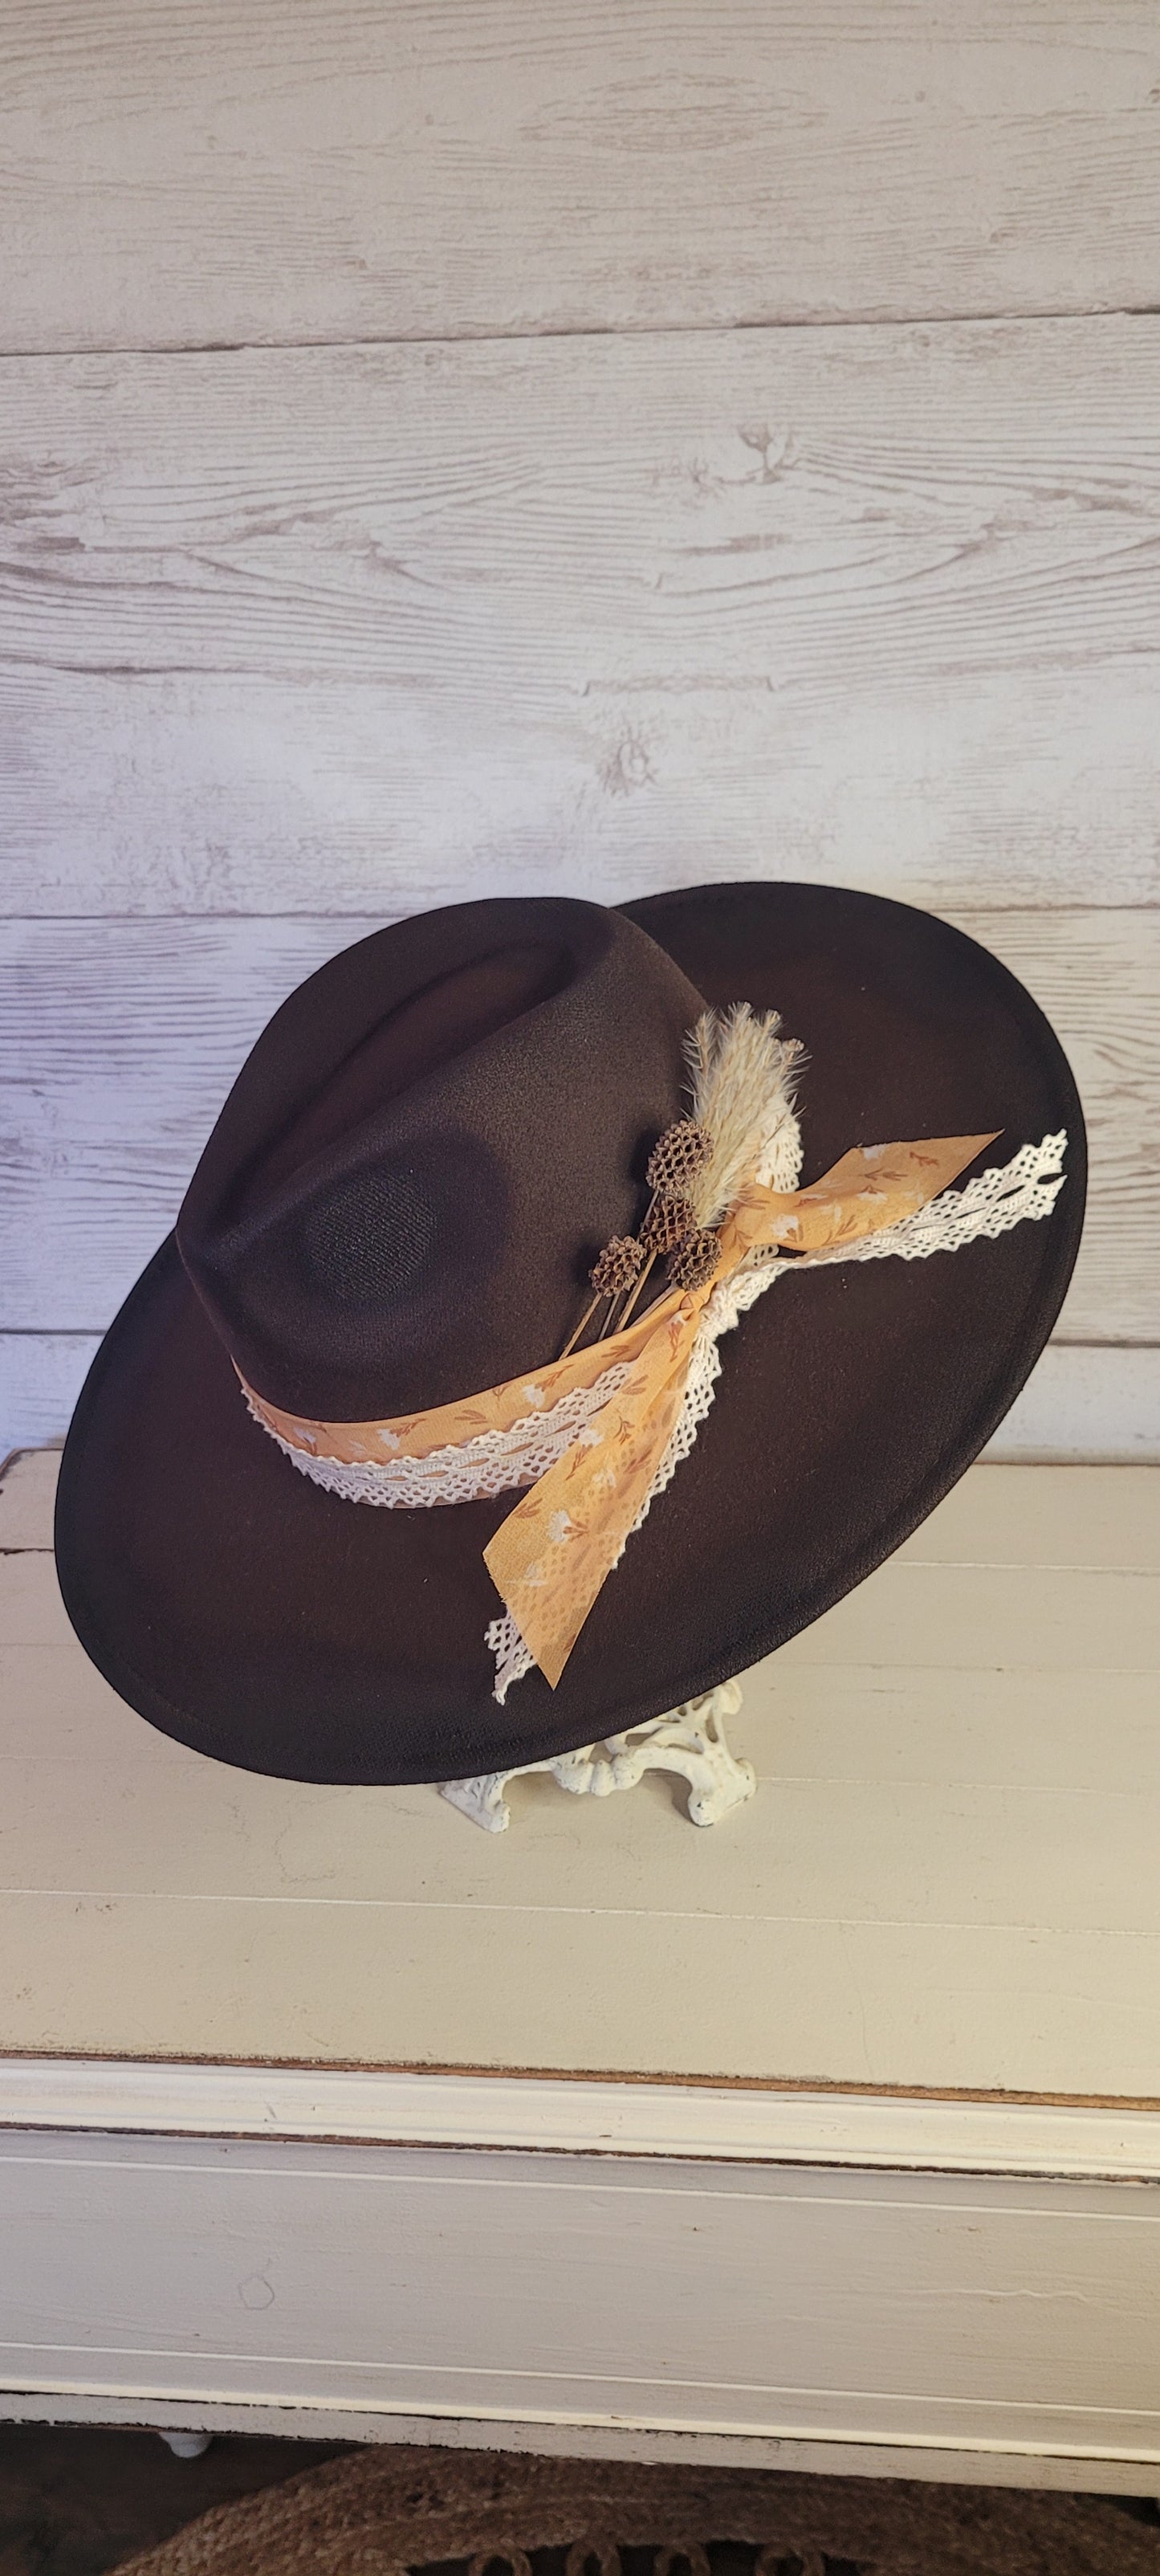 Features natural lace ribbon, sheer mustard ribbon, pine cones, & pampas Felt hat Flat brim 65% polyester and 35% cotton Ribbon drawstring for hat size adjustment Head Circumference: 24" Crown Height: 5" Brim Length: 15.75" Brim Width: 14.5" Branded & numbered inside crown Custom designed by Kayla